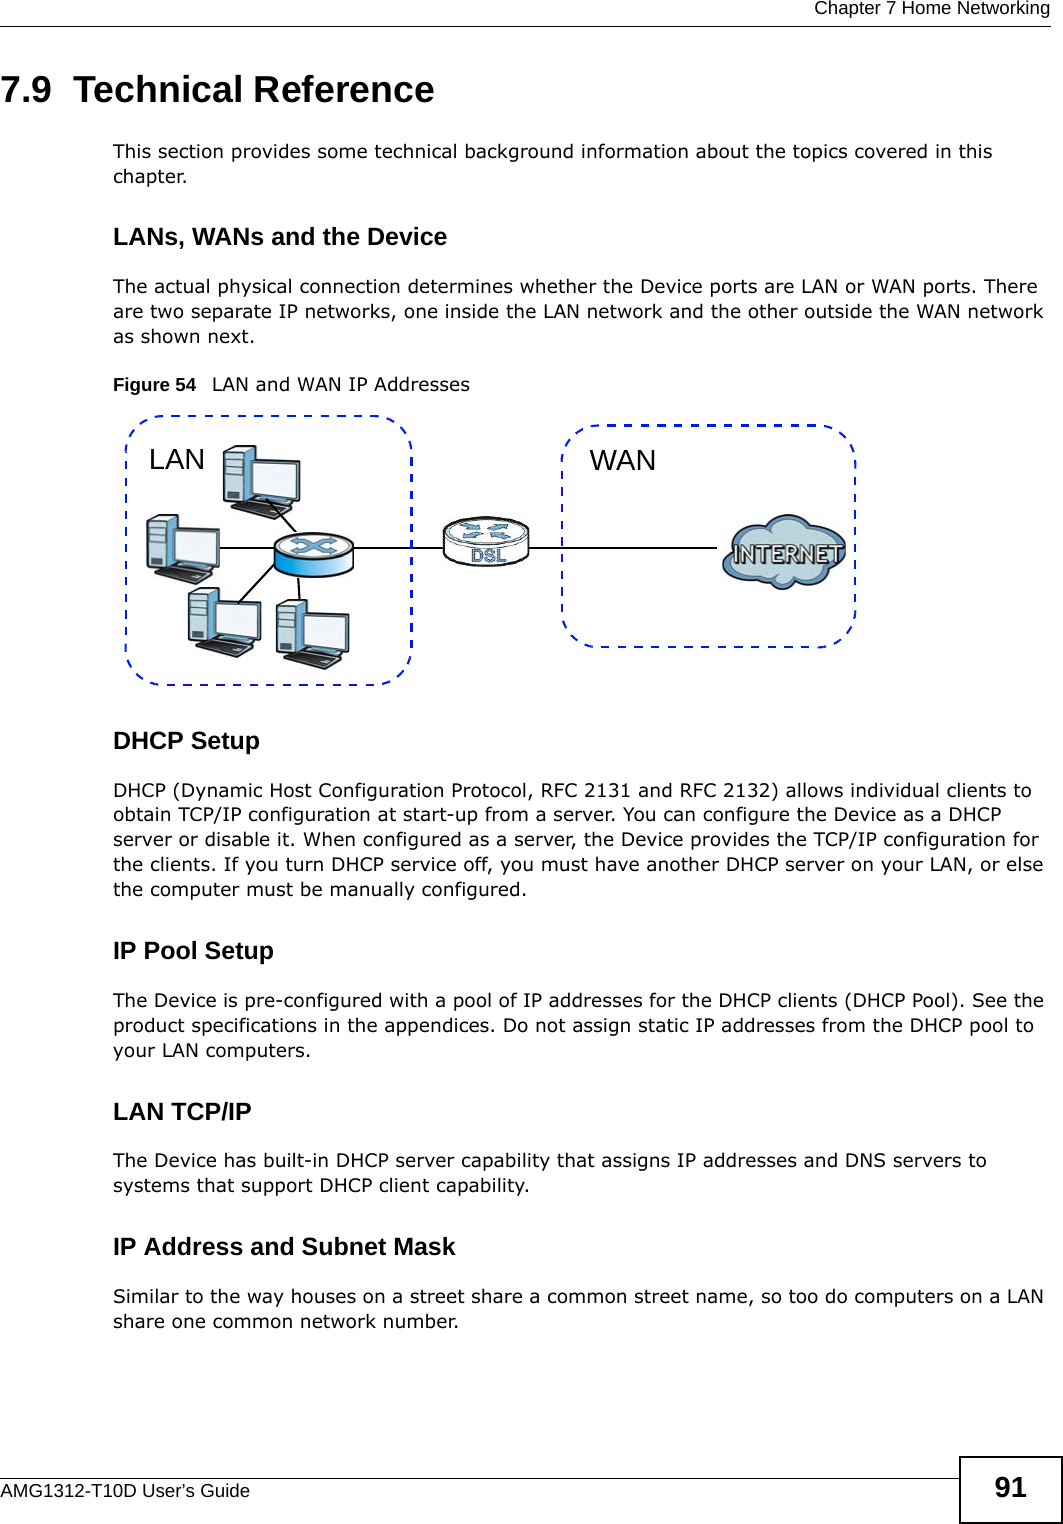  Chapter 7 Home NetworkingAMG1312-T10D User’s Guide 917.9  Technical ReferenceThis section provides some technical background information about the topics covered in this chapter.LANs, WANs and the DeviceThe actual physical connection determines whether the Device ports are LAN or WAN ports. There are two separate IP networks, one inside the LAN network and the other outside the WAN network as shown next.Figure 54   LAN and WAN IP AddressesDHCP SetupDHCP (Dynamic Host Configuration Protocol, RFC 2131 and RFC 2132) allows individual clients to obtain TCP/IP configuration at start-up from a server. You can configure the Device as a DHCP server or disable it. When configured as a server, the Device provides the TCP/IP configuration for the clients. If you turn DHCP service off, you must have another DHCP server on your LAN, or else the computer must be manually configured. IP Pool SetupThe Device is pre-configured with a pool of IP addresses for the DHCP clients (DHCP Pool). See the product specifications in the appendices. Do not assign static IP addresses from the DHCP pool to your LAN computers.LAN TCP/IP The Device has built-in DHCP server capability that assigns IP addresses and DNS servers to systems that support DHCP client capability.IP Address and Subnet MaskSimilar to the way houses on a street share a common street name, so too do computers on a LAN share one common network number.WANLAN